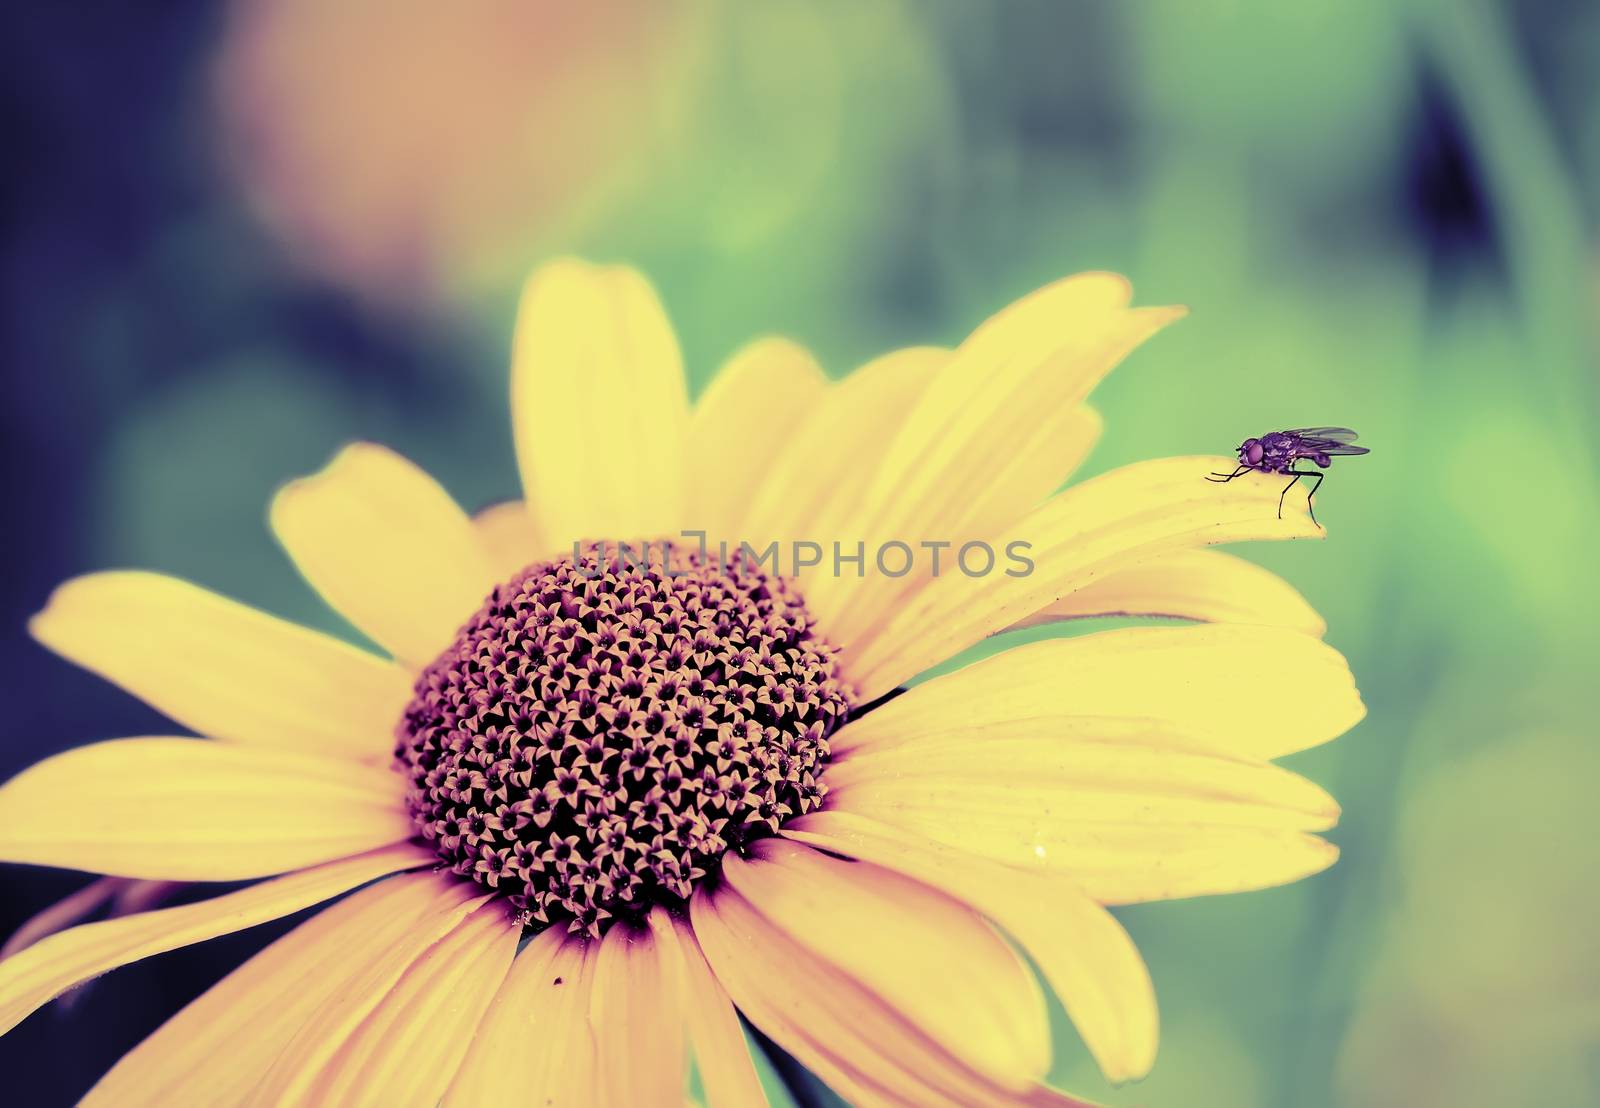 Fly on a yellow flower by Cipariss